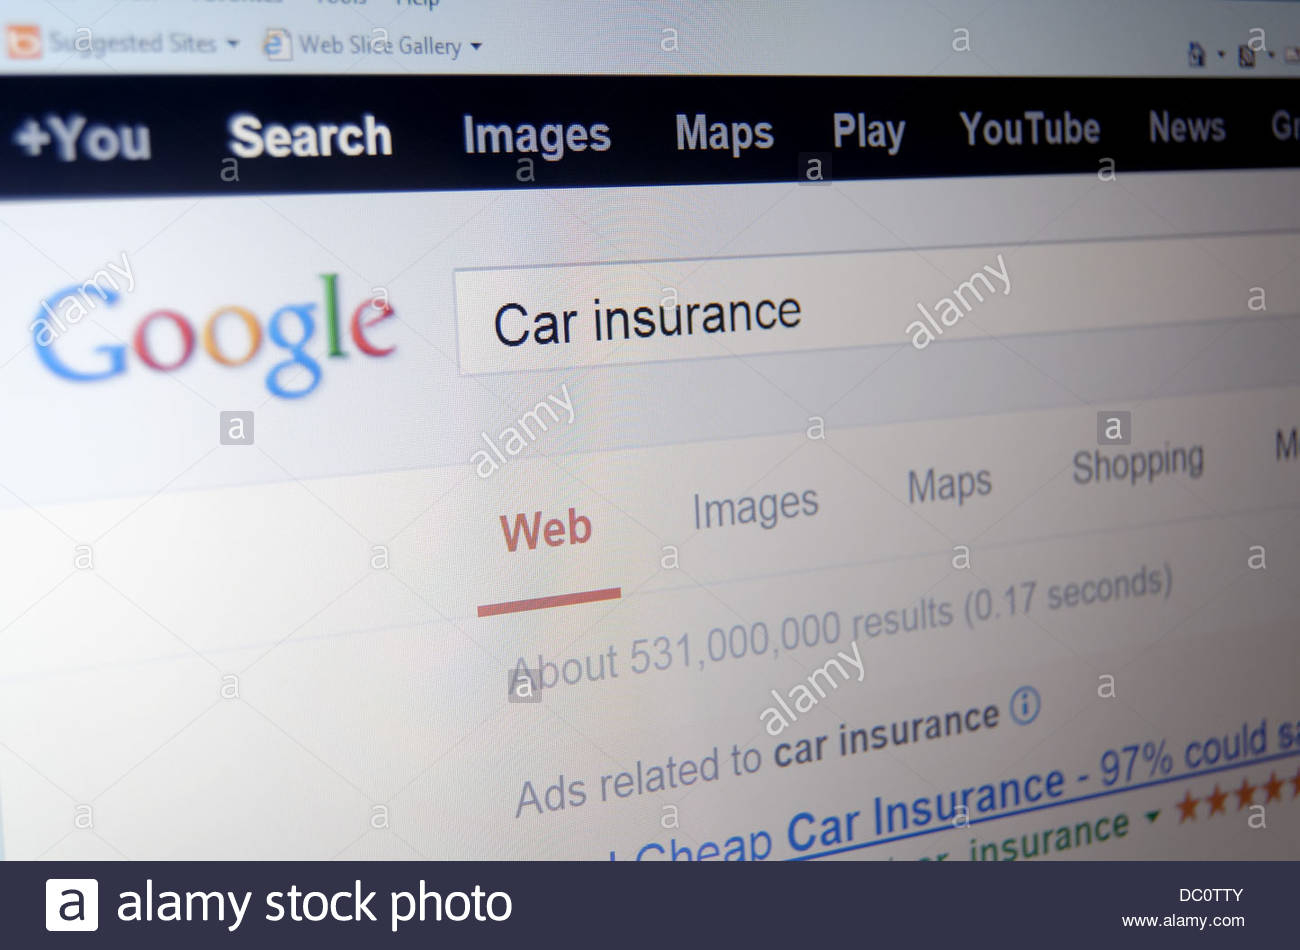 Car Insurance Internet Search Using The Google Search intended for dimensions 1300 X 950